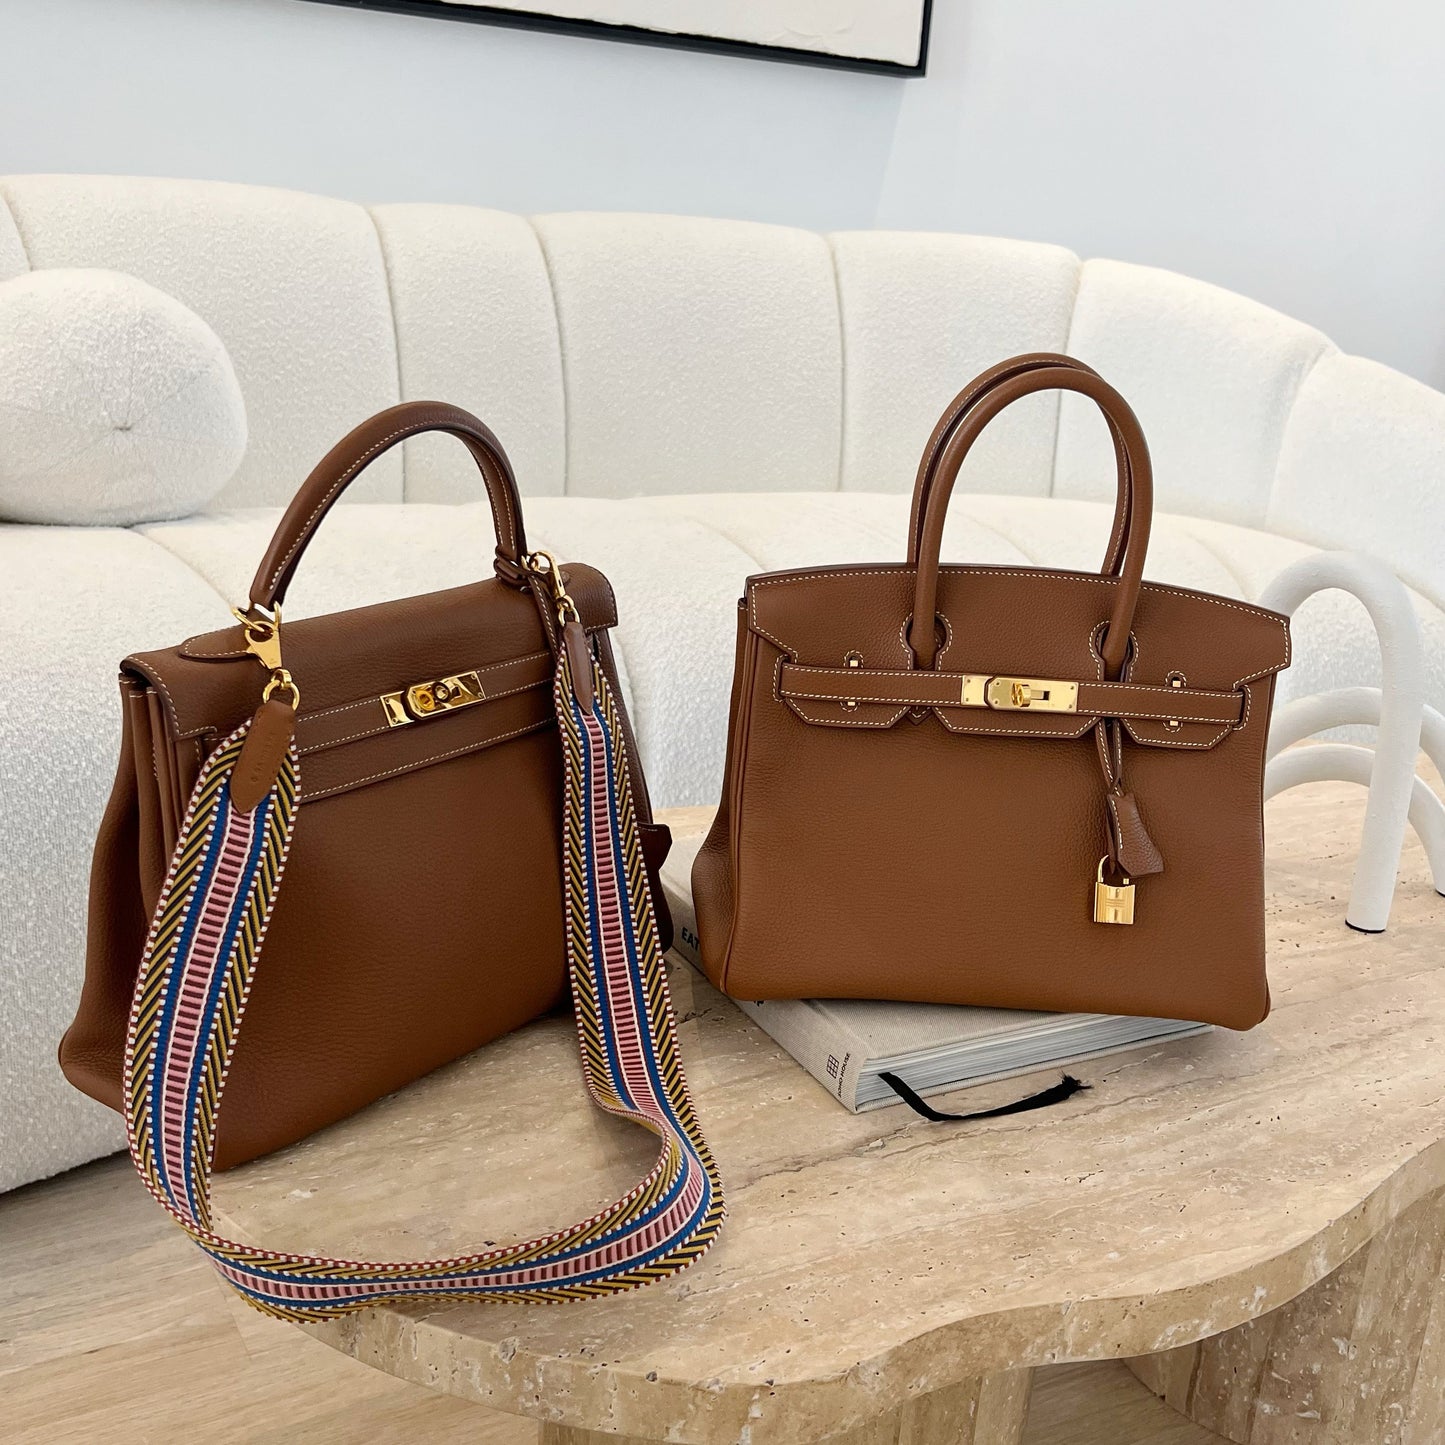 How Does the Kelly Weigh in in Comparison to the Birkin?